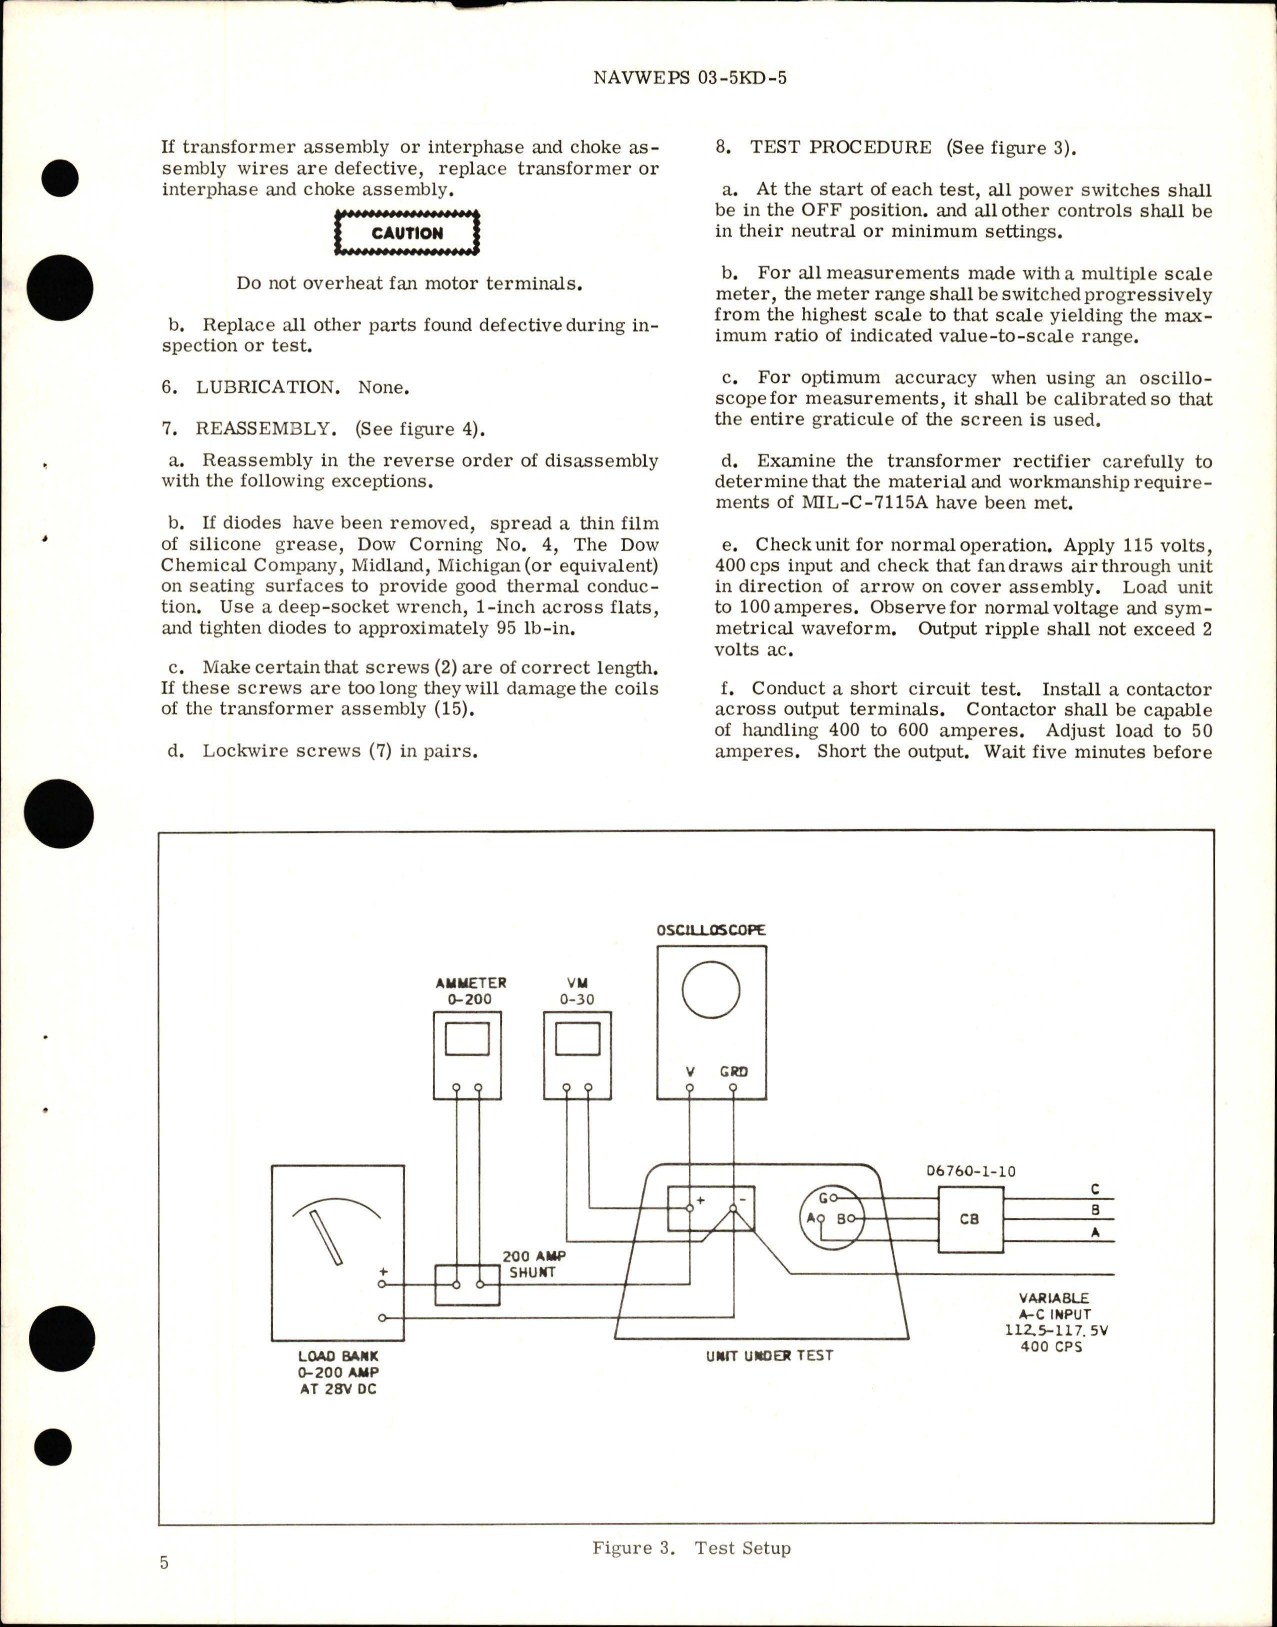 Sample page 5 from AirCorps Library document: Overhaul with Parts Breakdown for AC-DC Transformer Rectifier - Part W1278-2